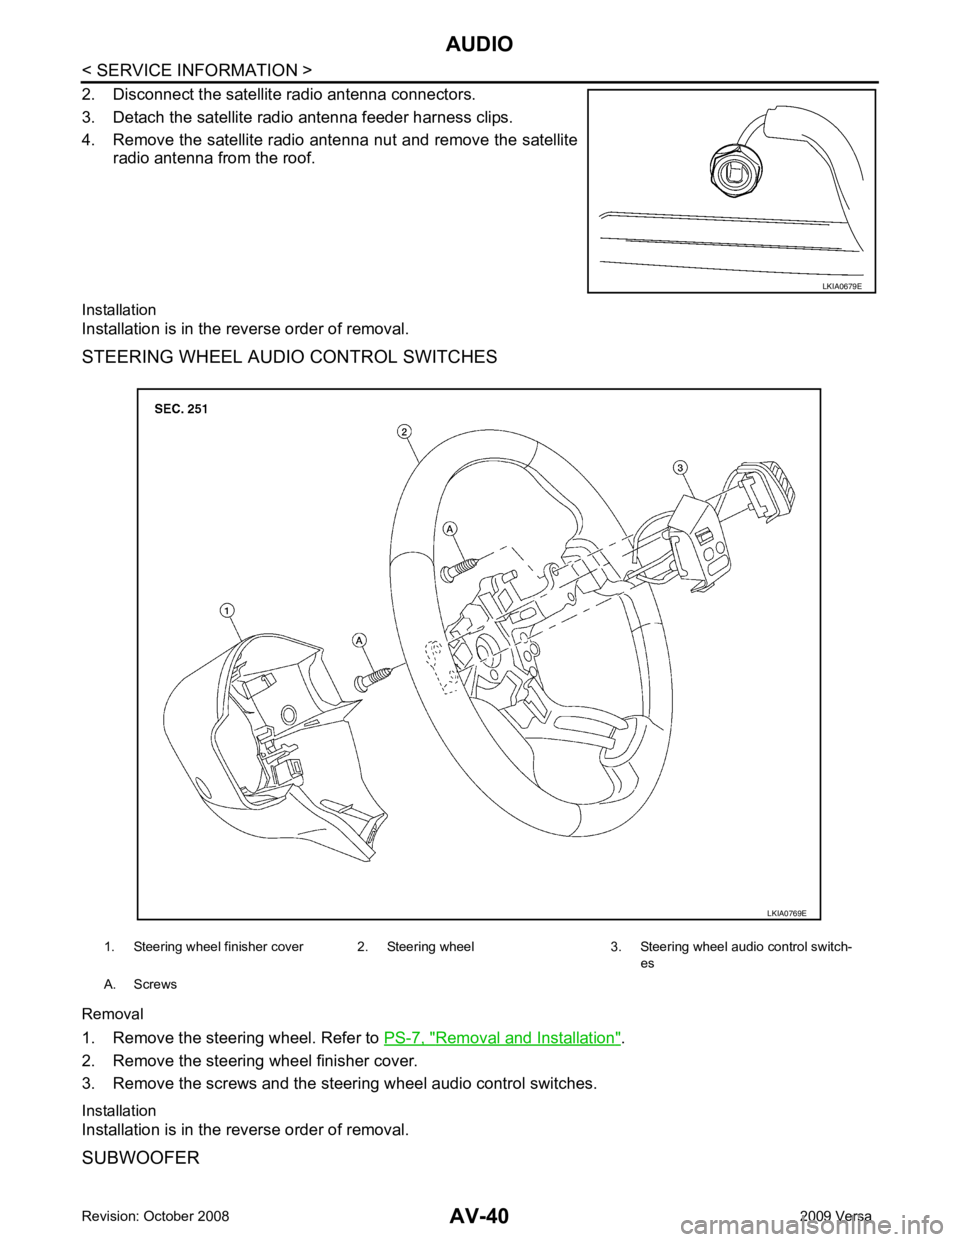 NISSAN TIIDA 2009  Service Repair Manual Removal and Installation " .
2. Remove the steering wheel finisher cover.
3. Remove the screws and the steering wheel audio control switches.
Installation
Installation is in the reverse order of remov